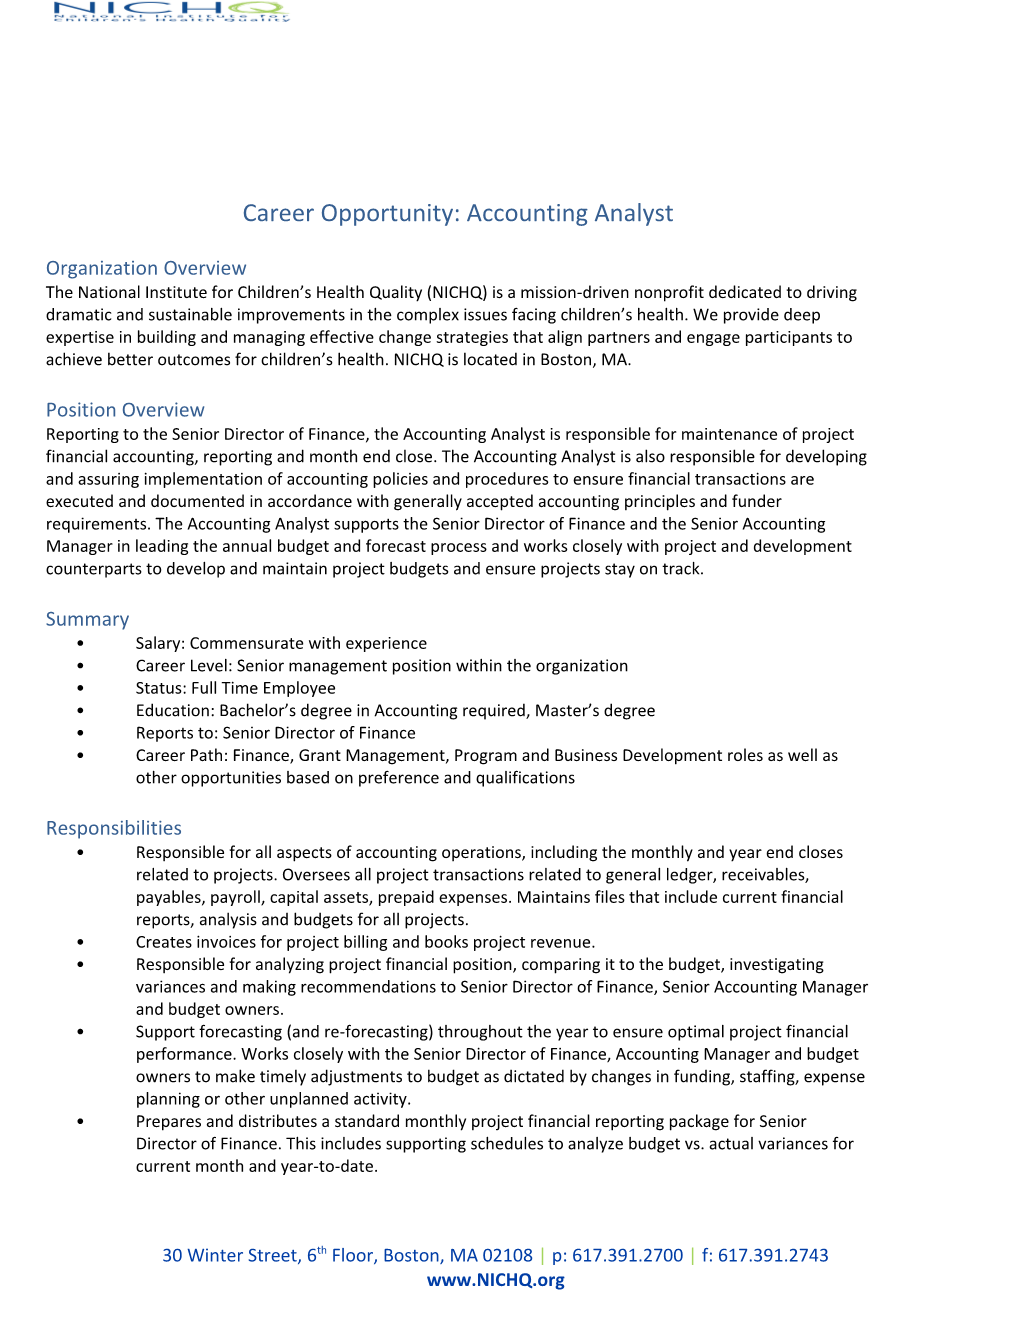 Career Opportunity: Accounting Analyst